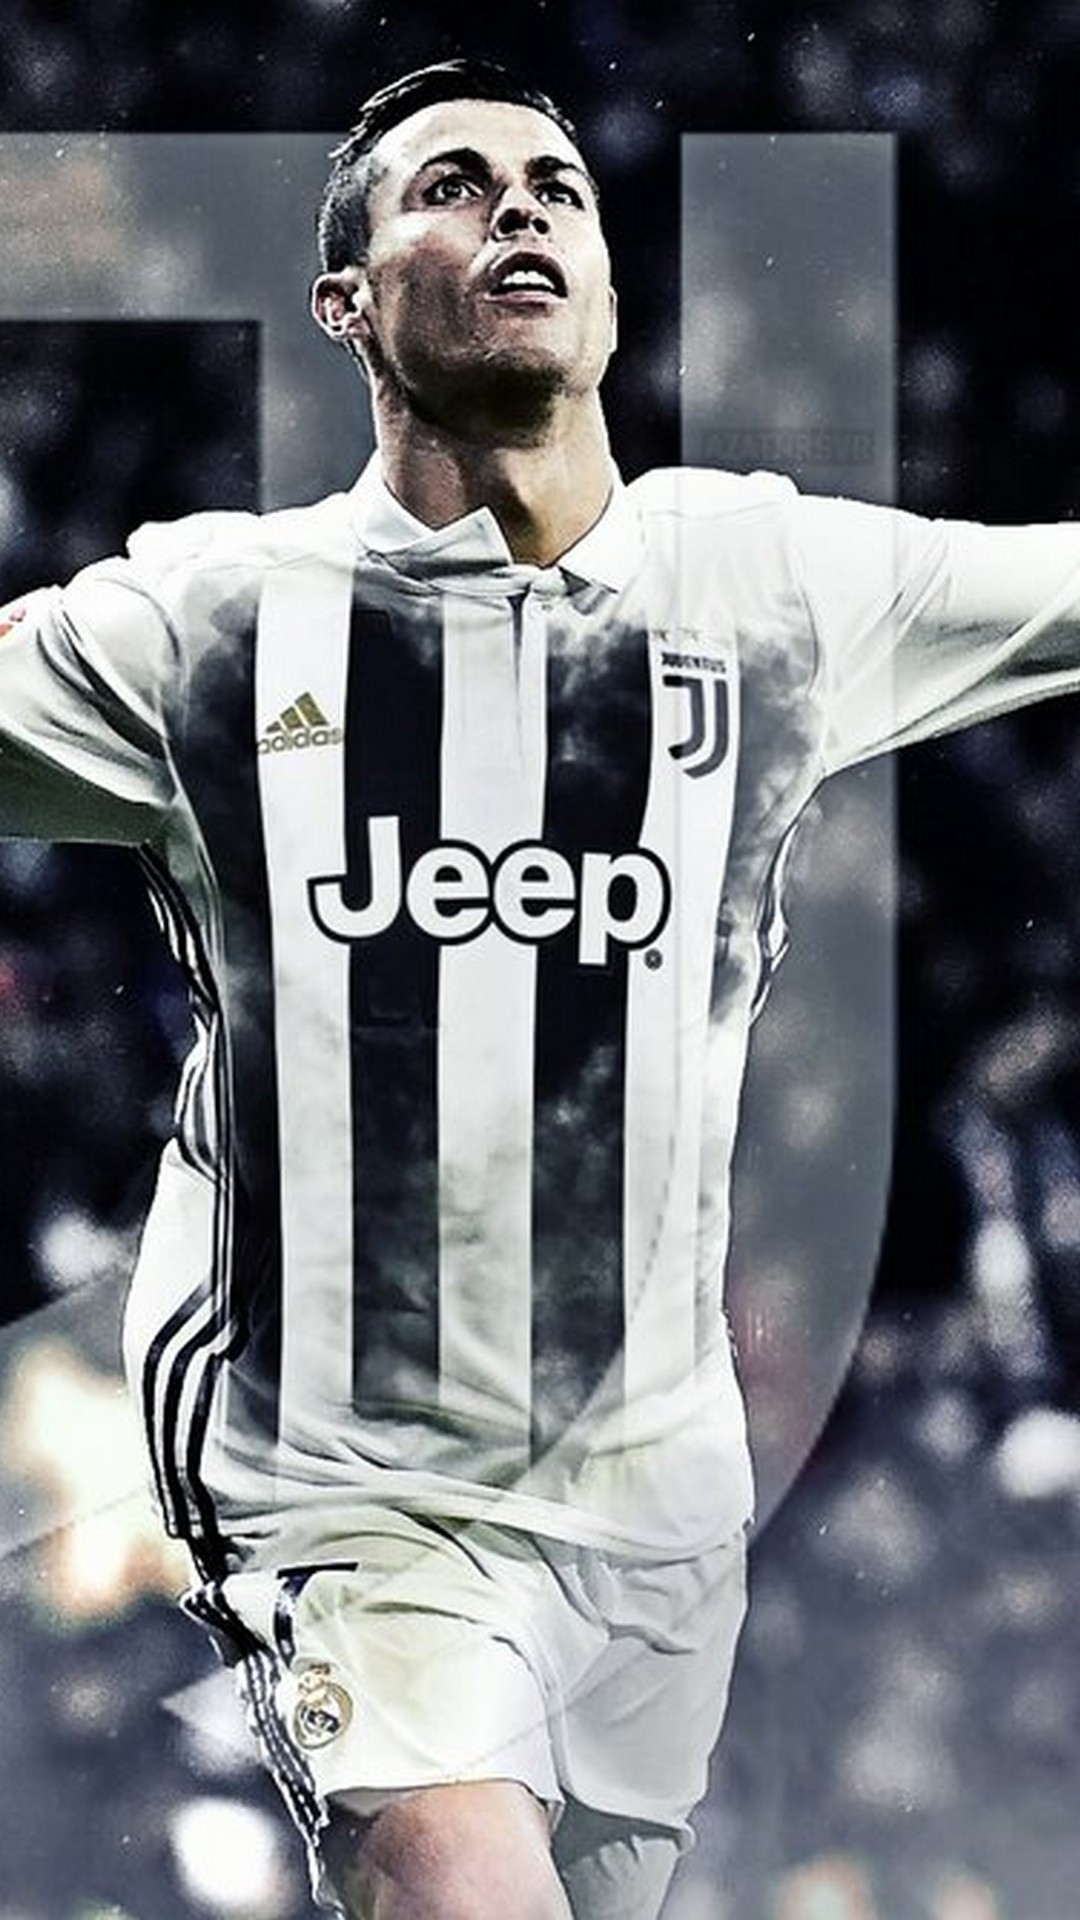 CR7 Juventus Wallpaper iPhone with resolution 1080X1920 pixel. You can make this wallpaper for your iPhone 5, 6, 7, 8, X backgrounds, Mobile Screensaver, or iPad Lock Screen